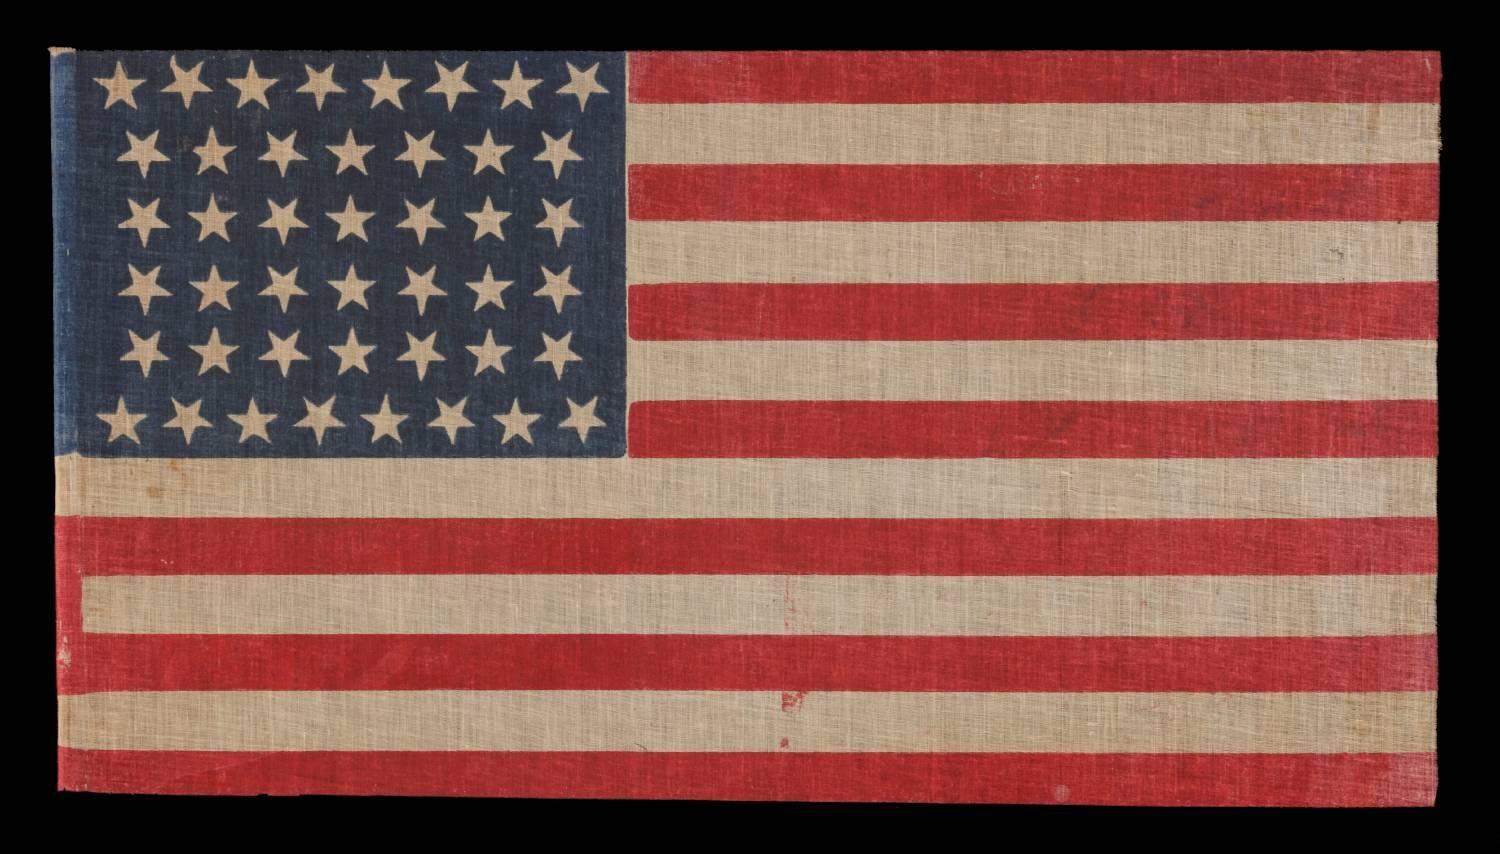 44 dancing or tumbling stars in an hourglass formation, Wyoming statehood, 1890-1896:

44 star American parade flag printed on coarse, glazed cotton. These are configured in rows of 8-7-7-7-7-8, with the top and bottom rows offset so that they